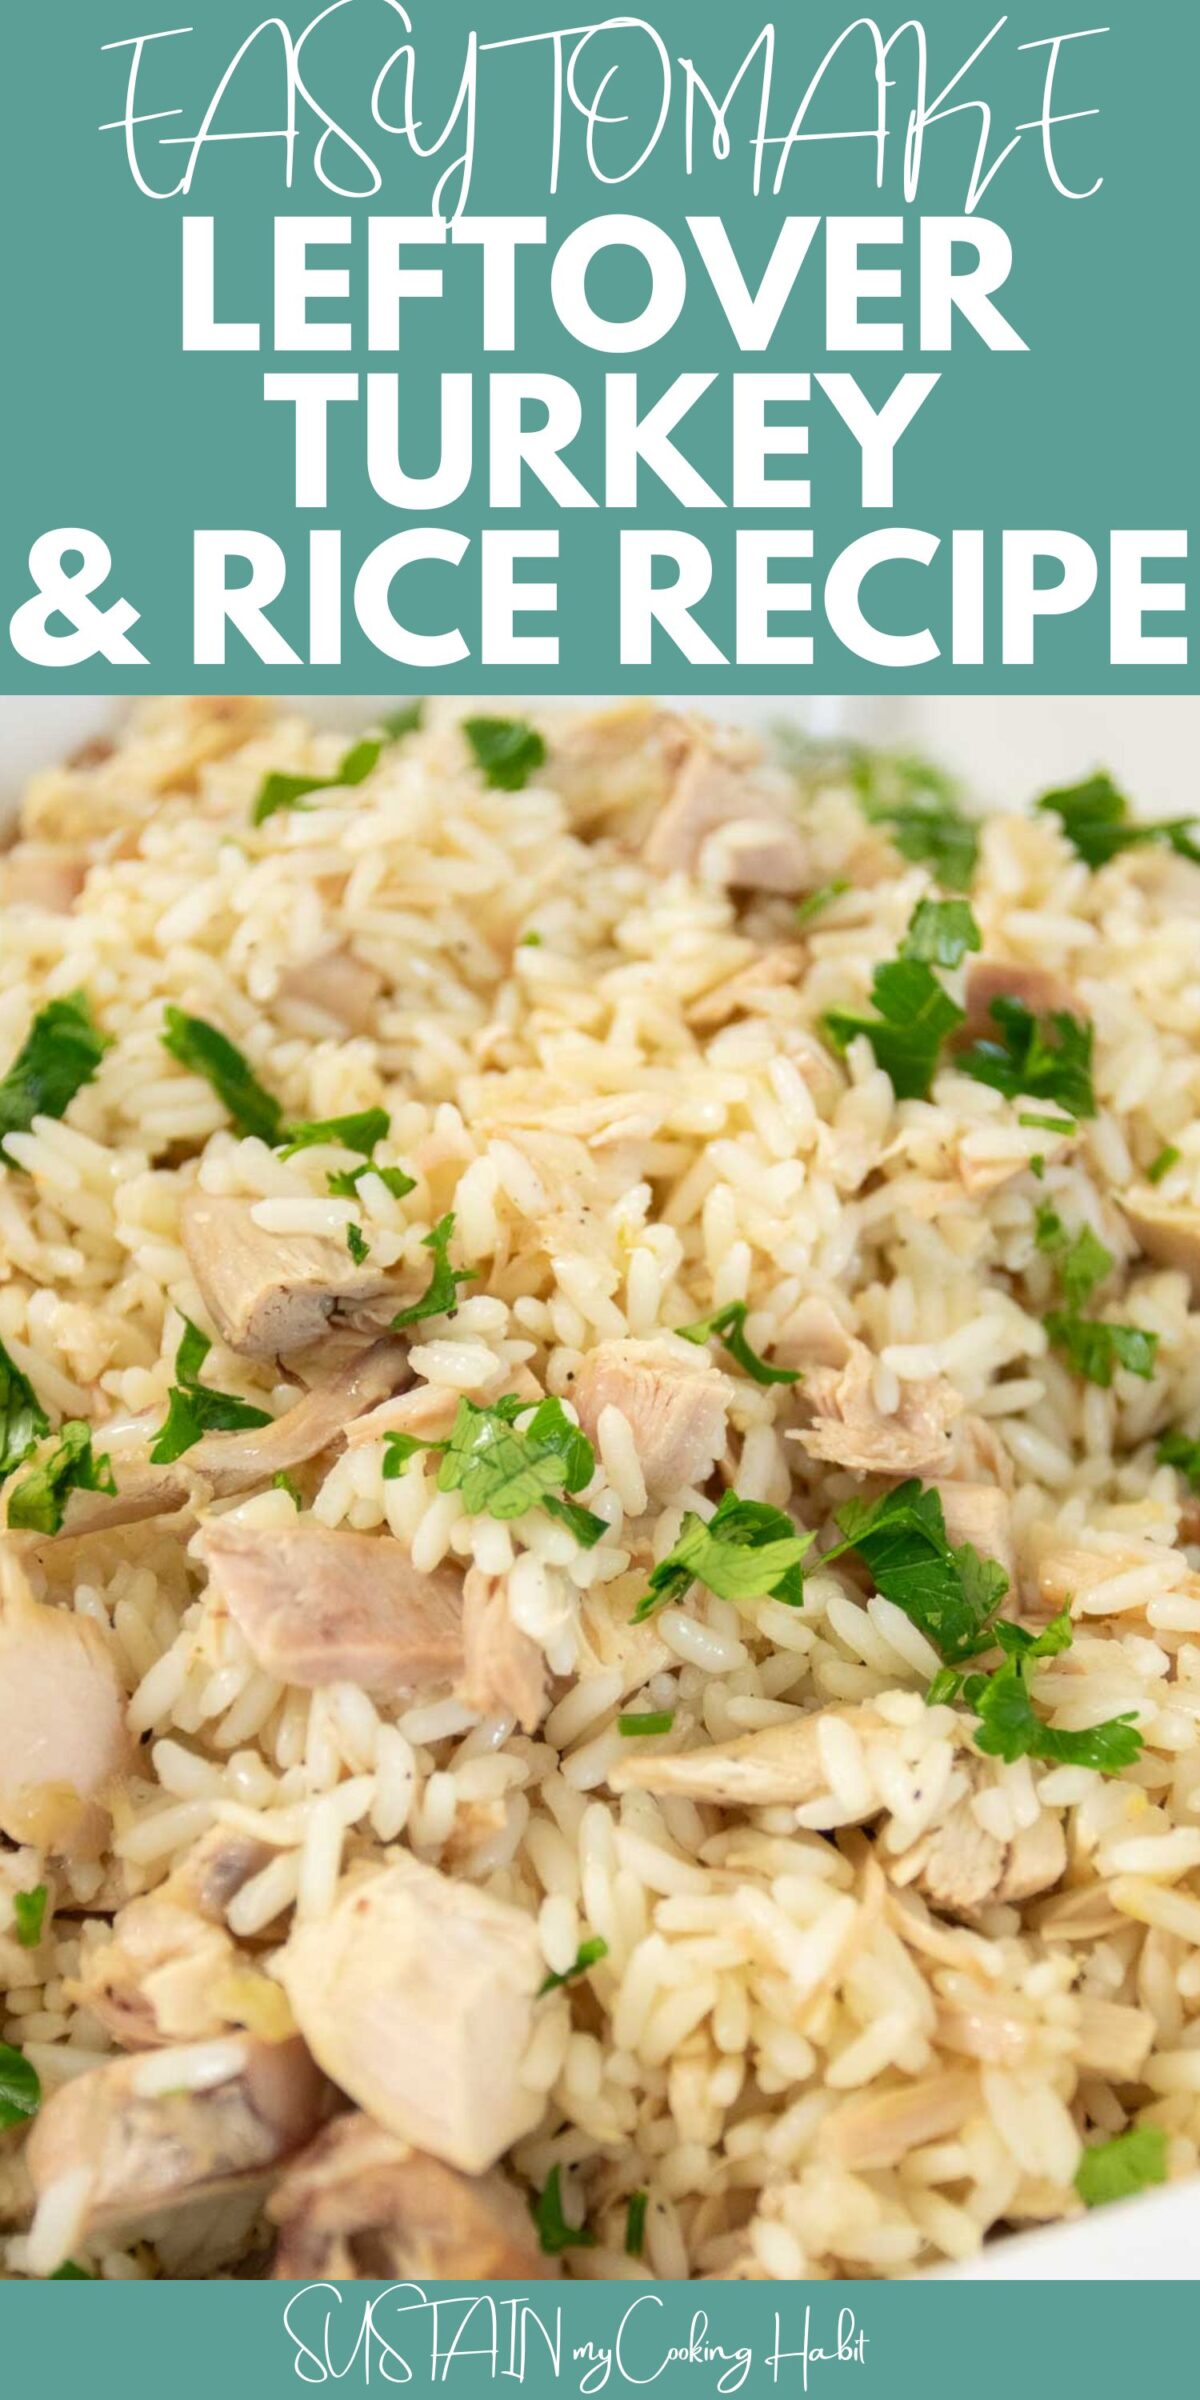 Close up of leftover turkey mixed with cooked rice and garnish with text overlay.